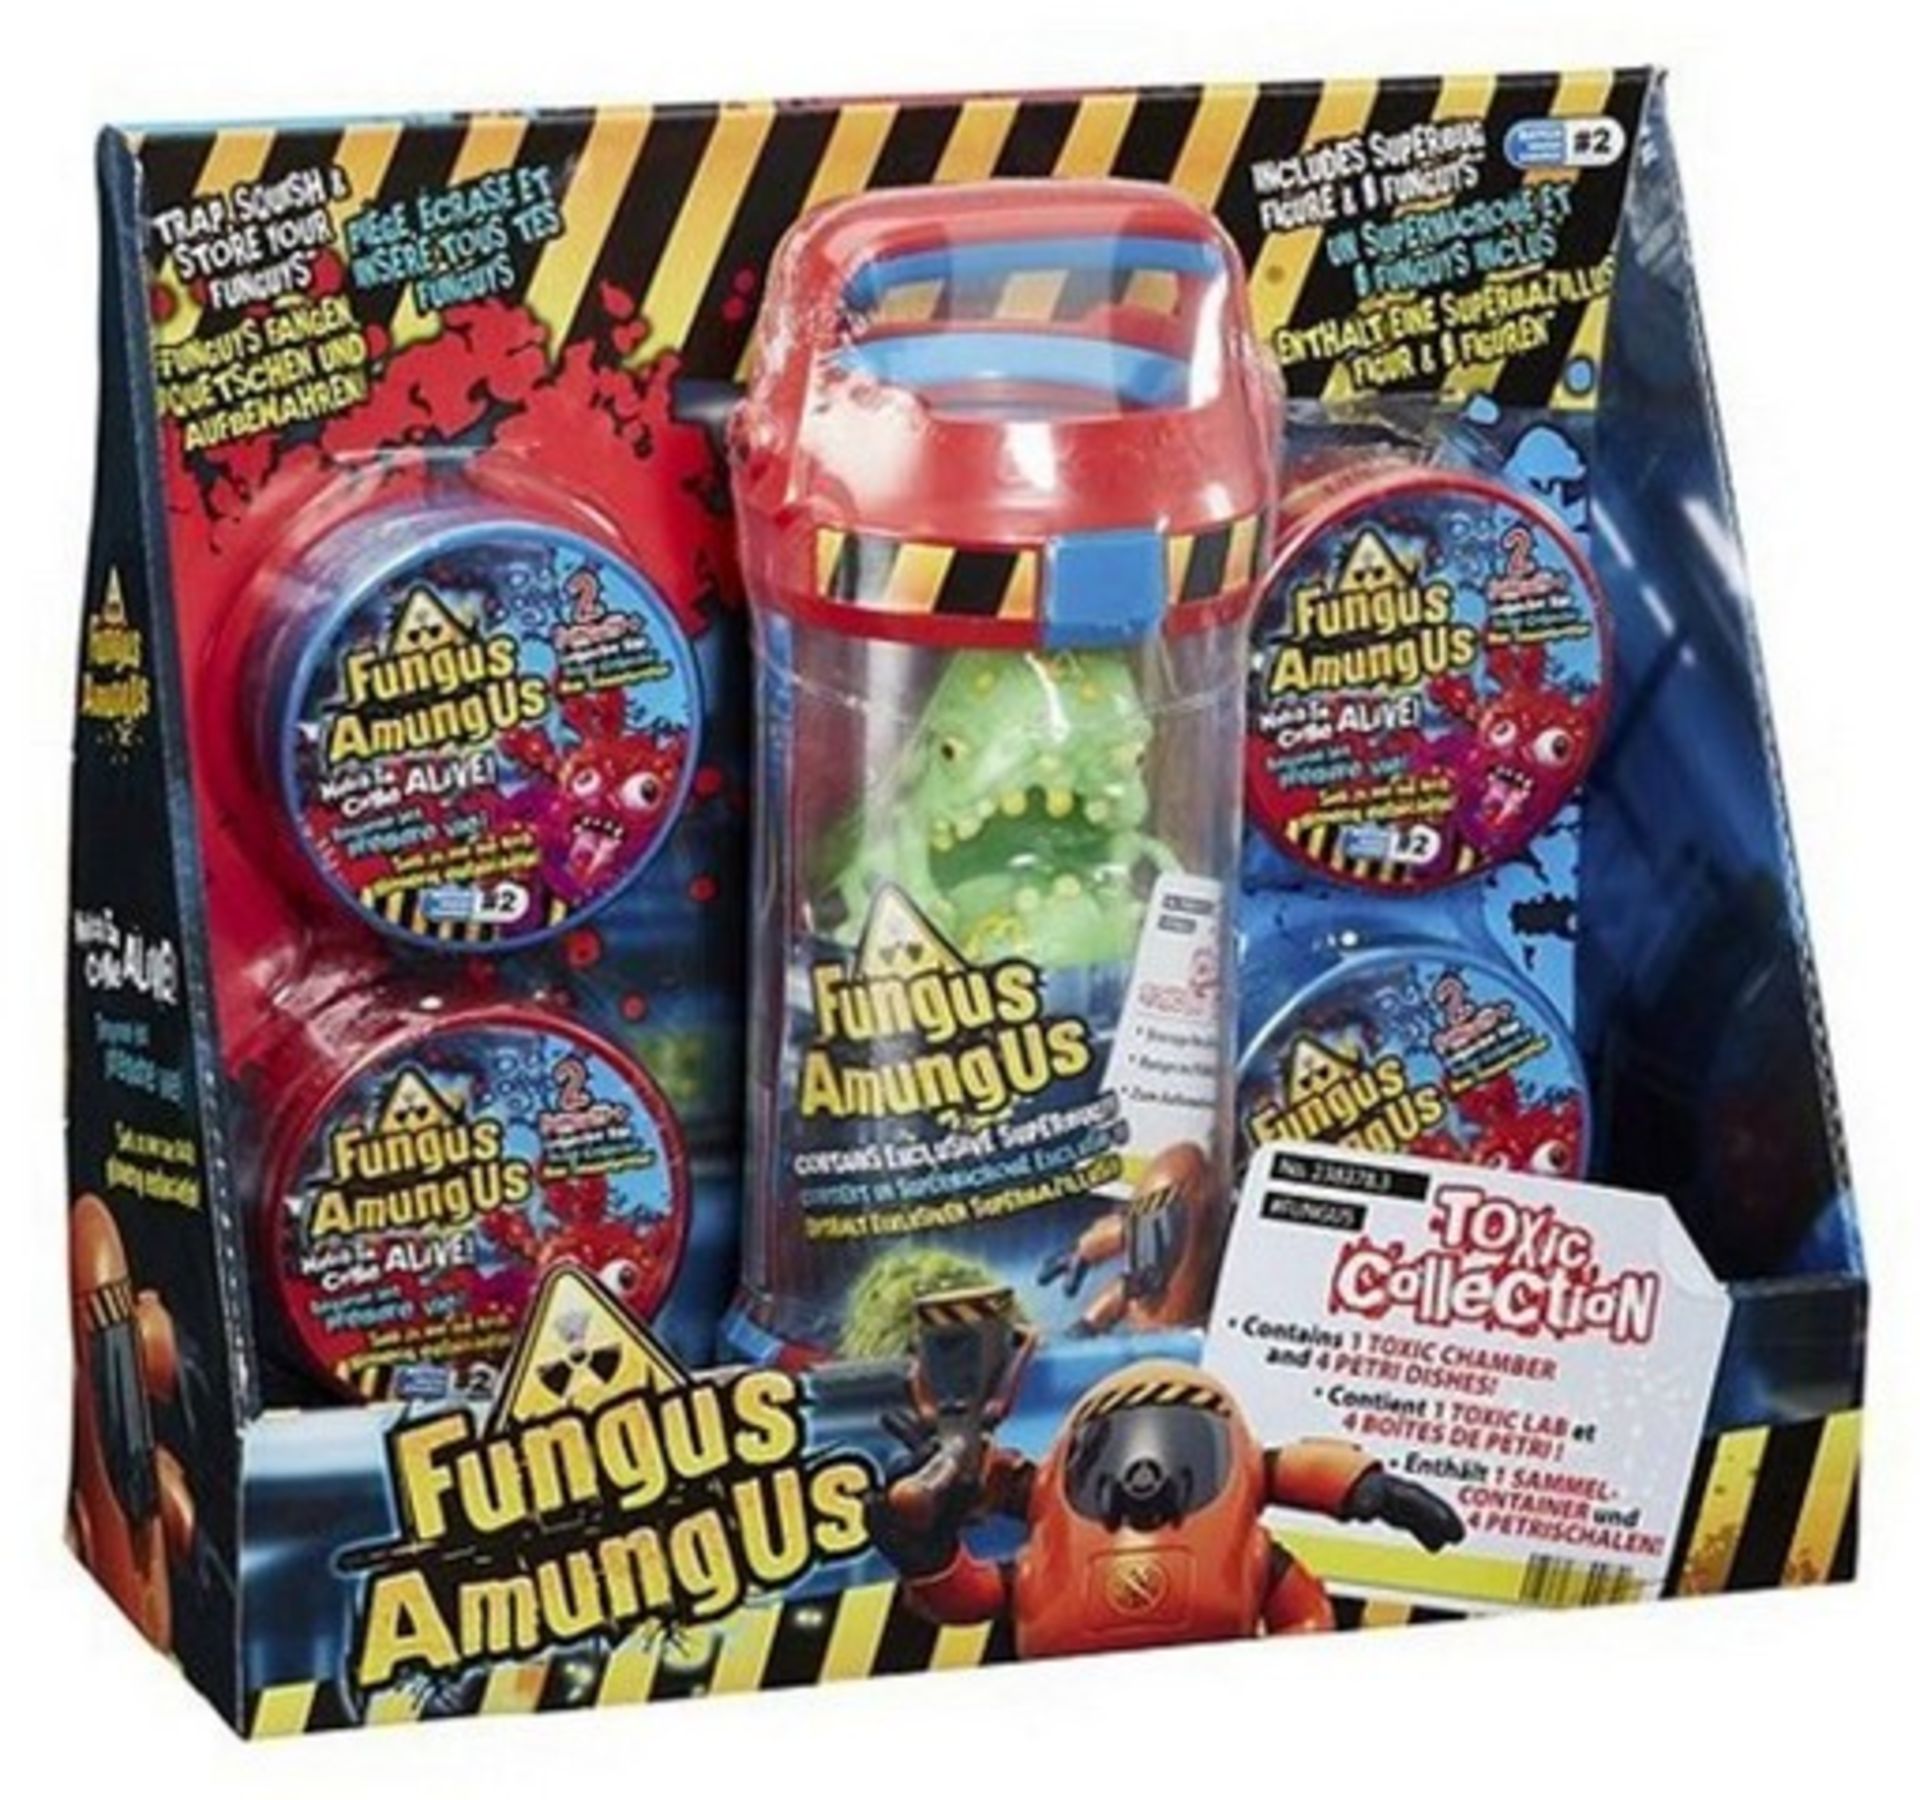 V Brand New Fungus Amungus Toxic Collection ISP Up To £24.99 (Ebay)